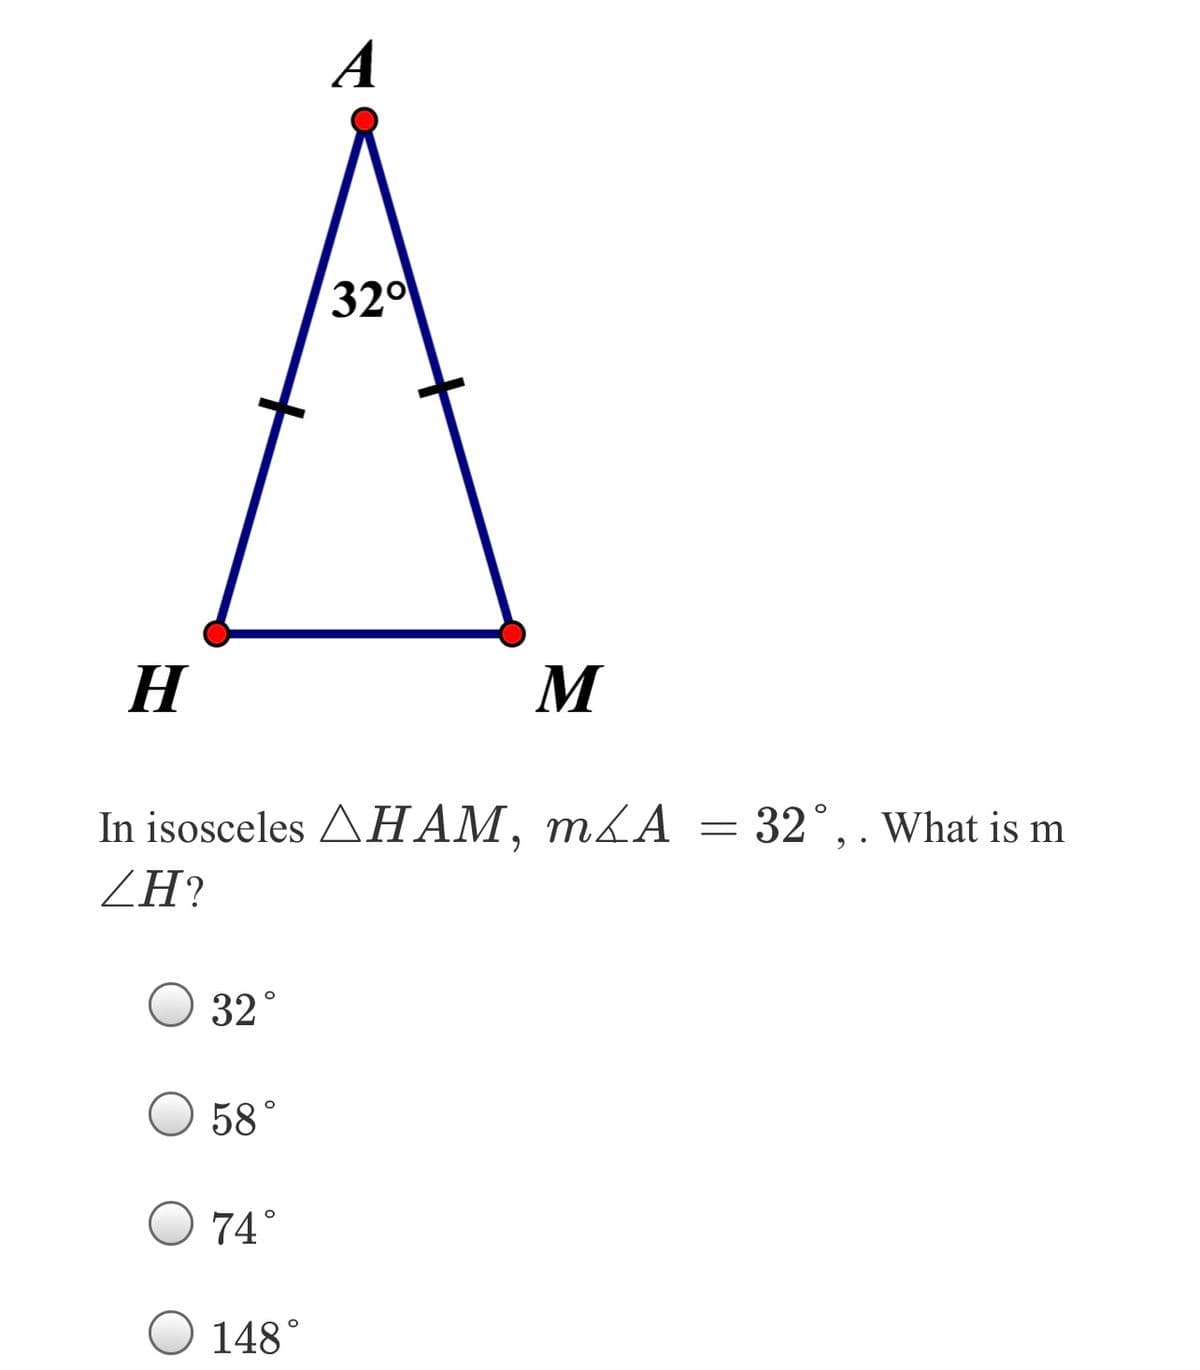 A
320
H
M
In isosceles AHAM,
, mLA = 32°,. What is m
ZH?
32°
58°
74°
Ο 148
